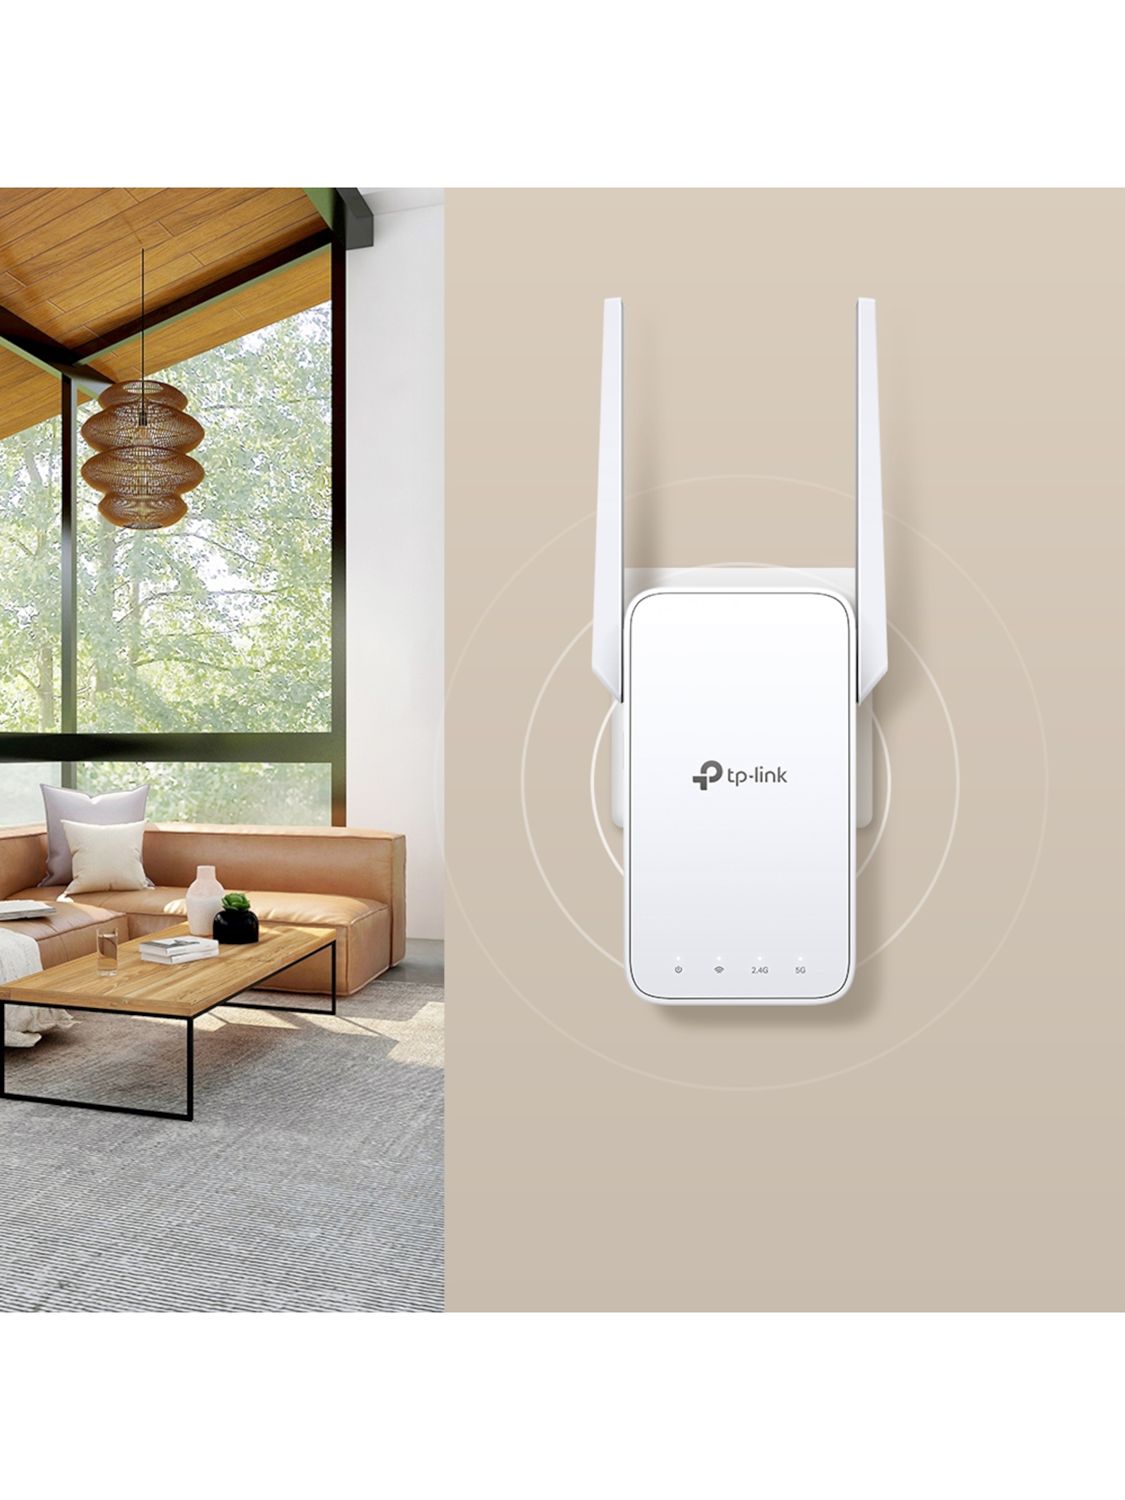 TP-LINK RE305 AC1200 Dual-Band Wi-Fi Wireless Range Extender